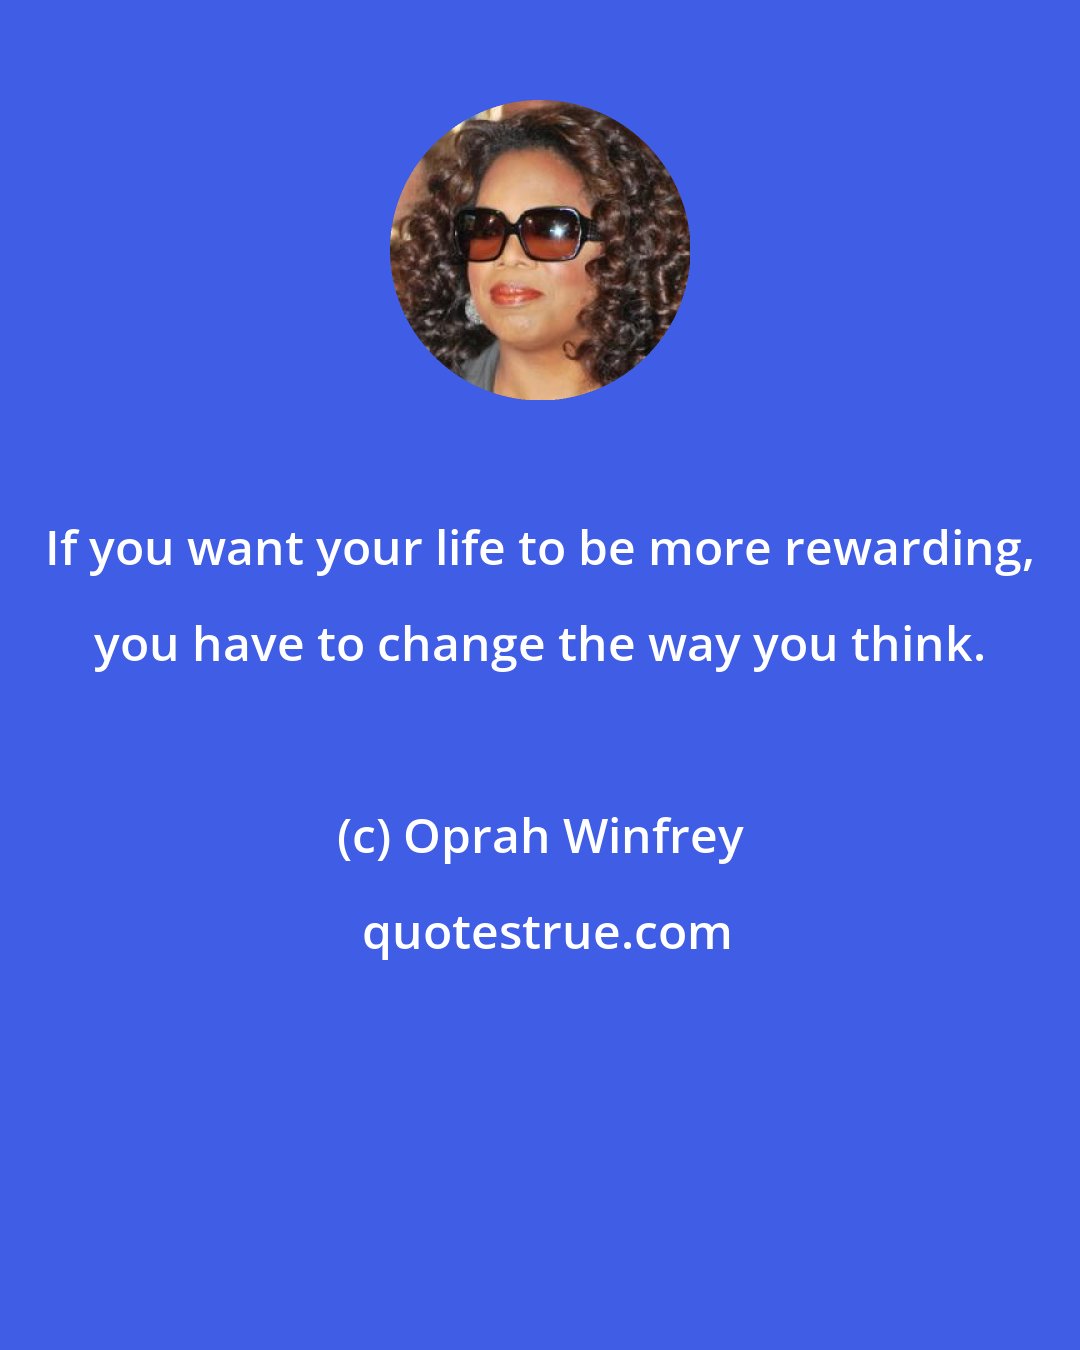 Oprah Winfrey: If you want your life to be more rewarding, you have to change the way you think.